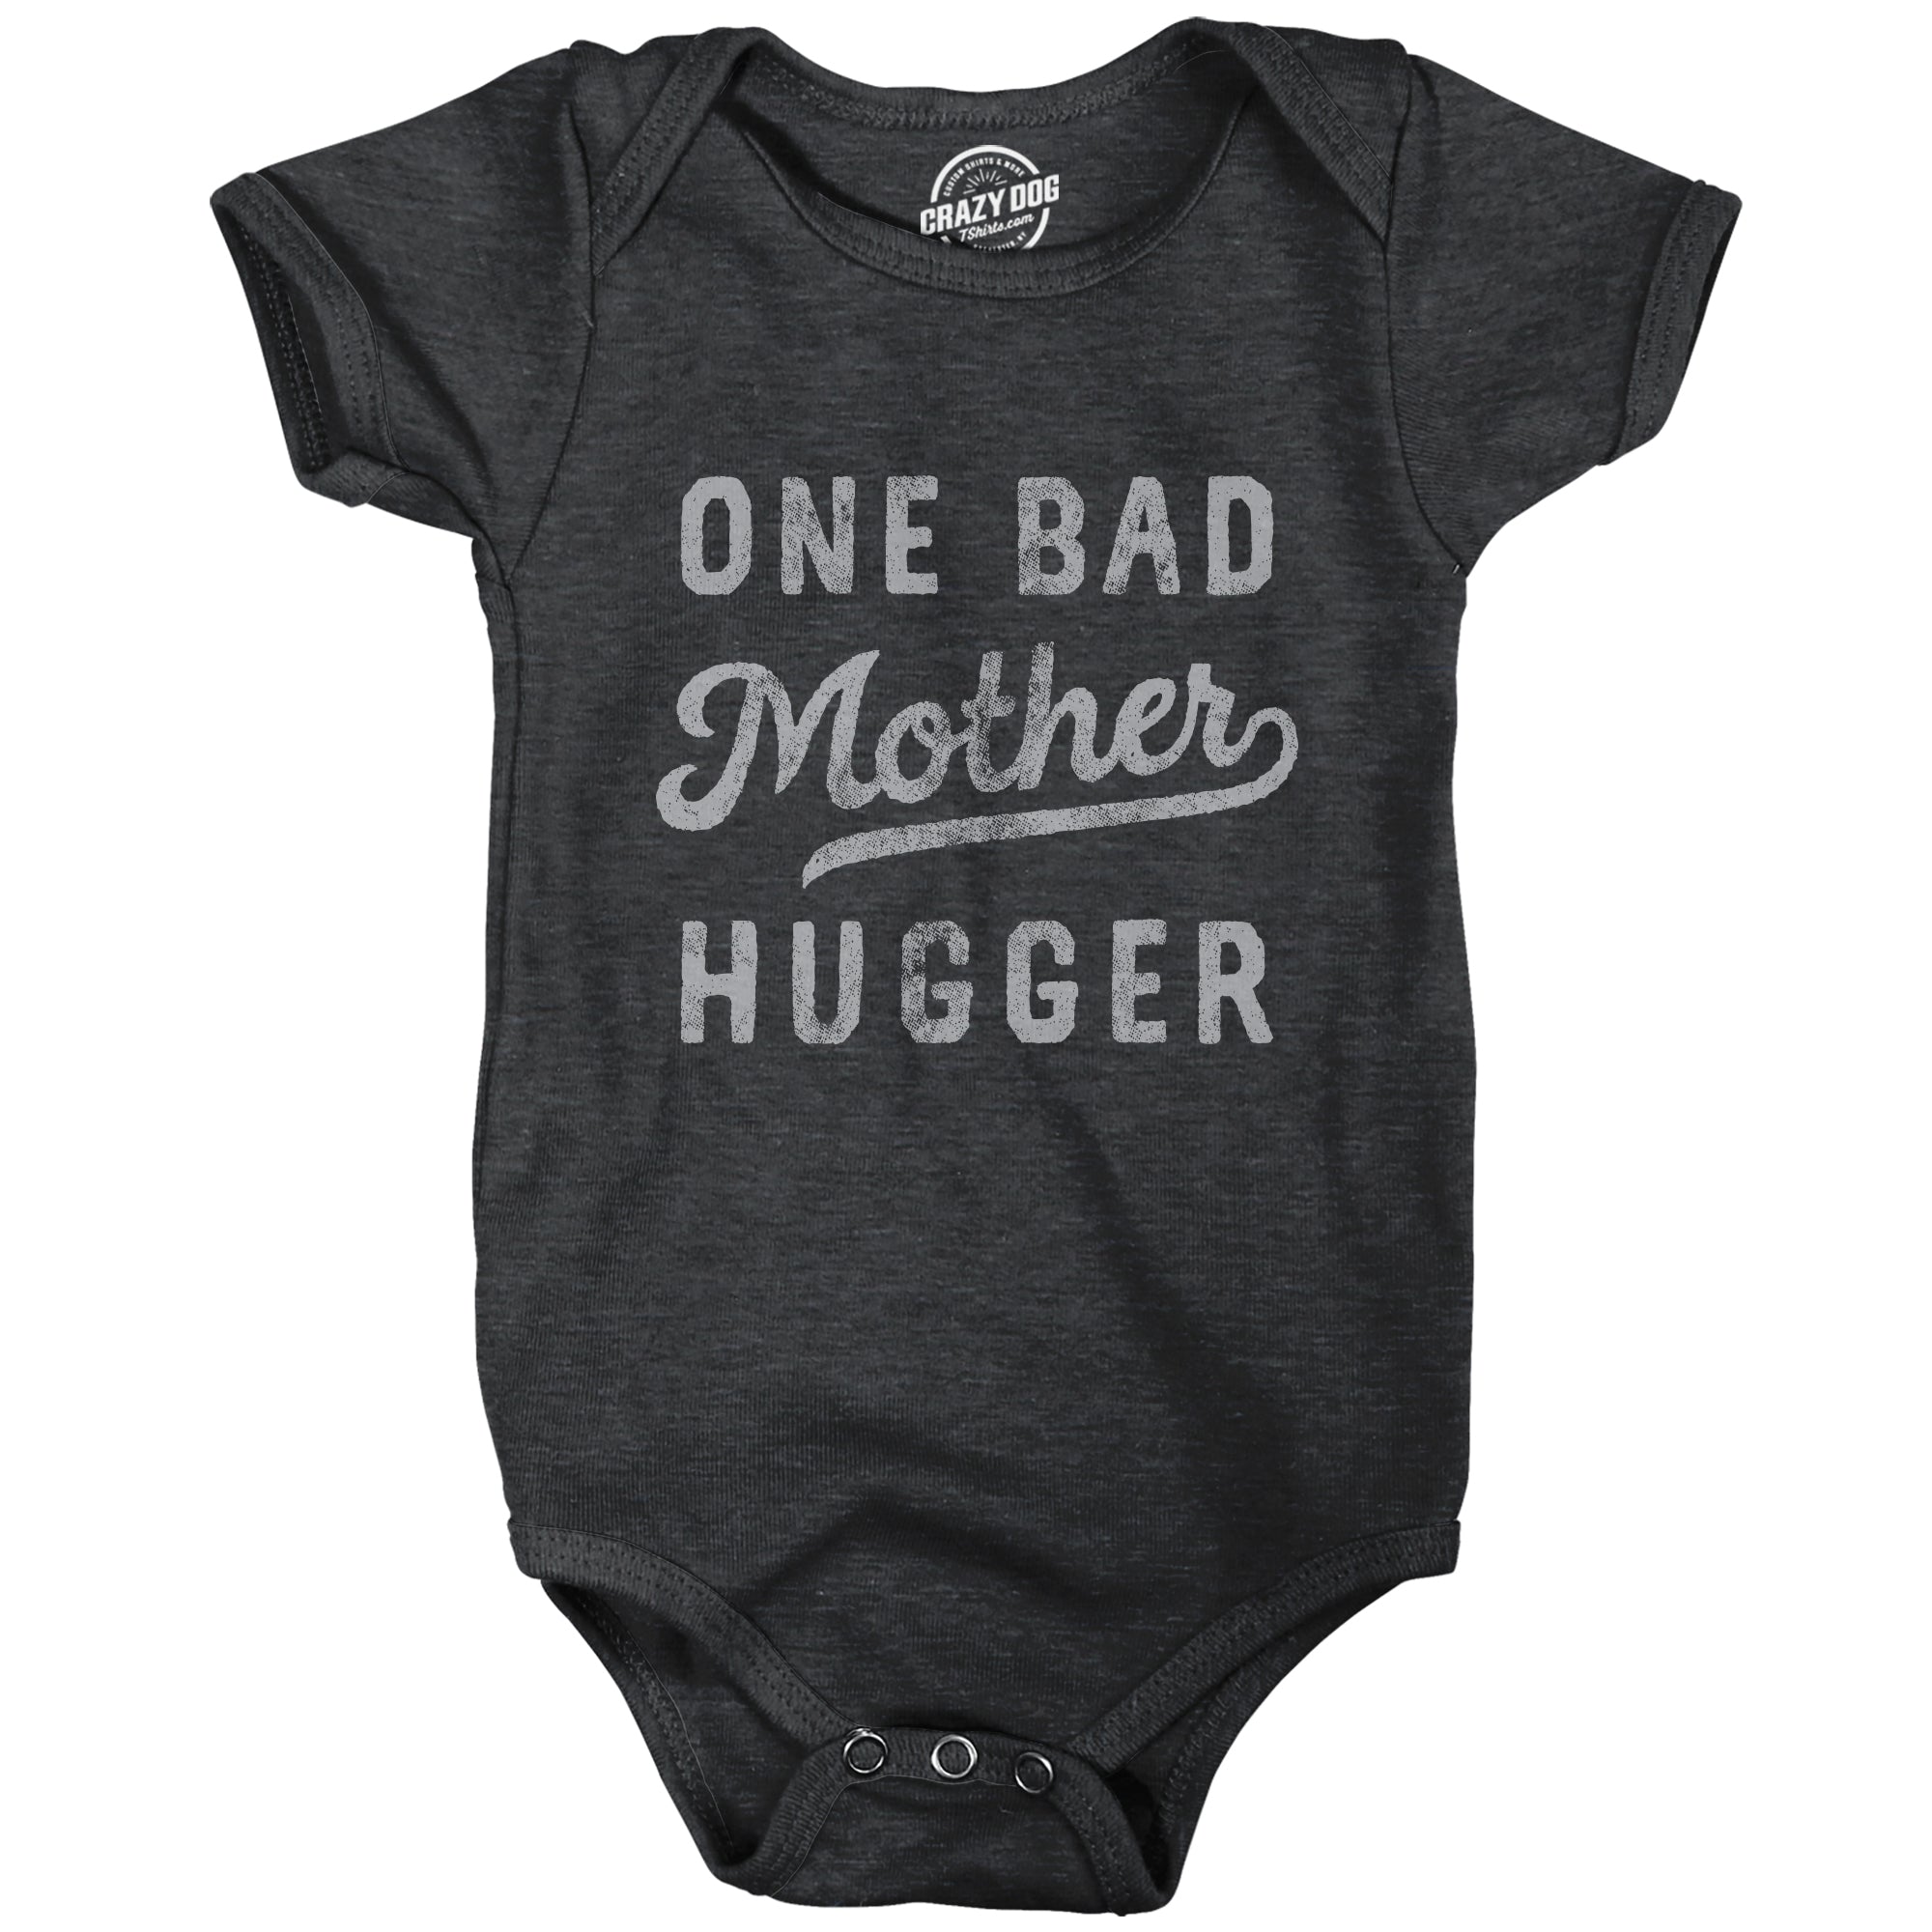 Funny Heather Black One Bad Mother Hugger Onesie Nerdy Mother's Day Sarcastic Tee